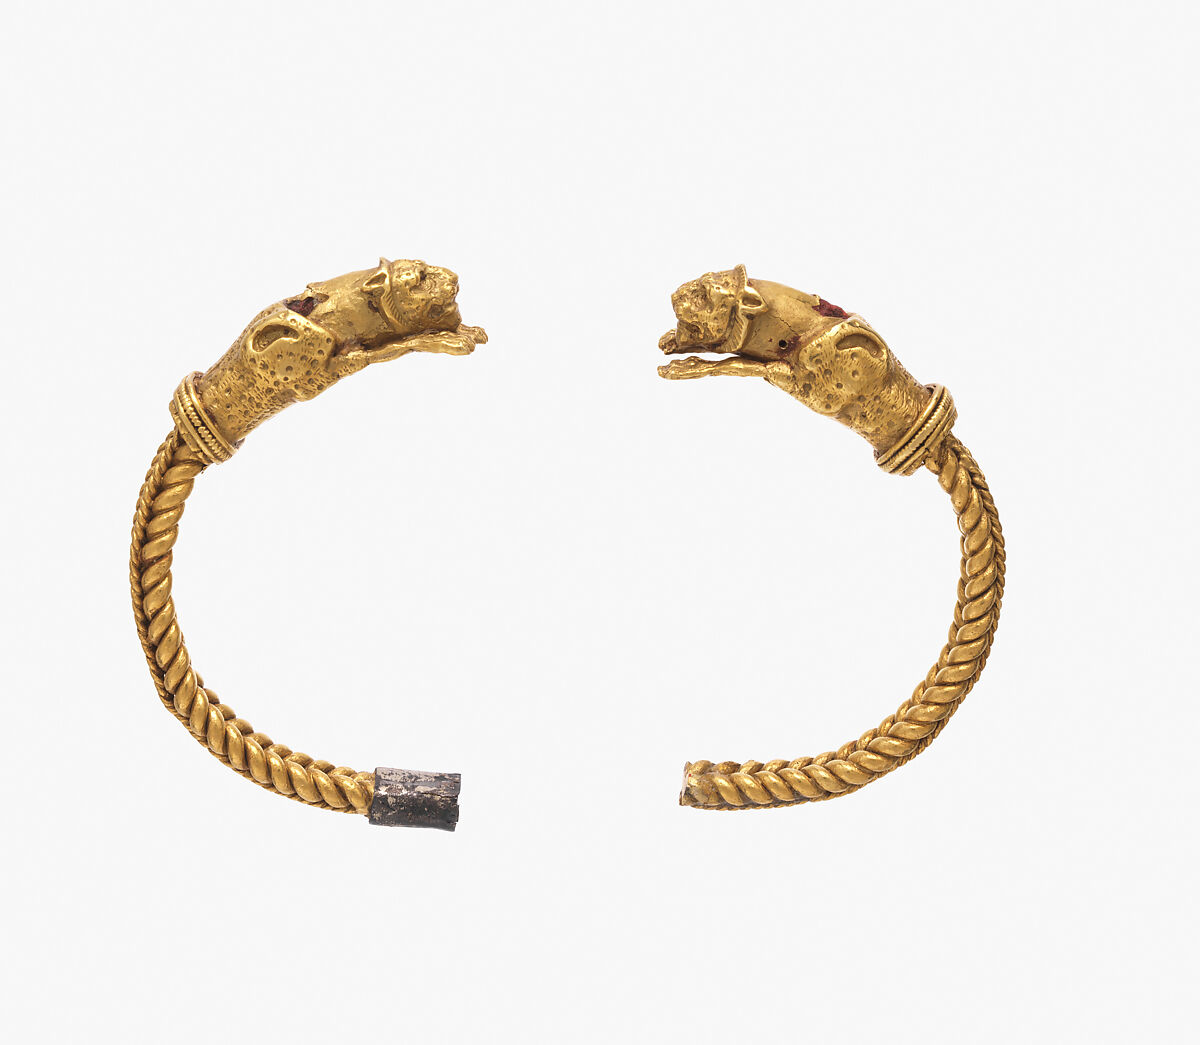 Bracelet with terminals in form of lion foreparts, Gold, cinnabar, Iran 